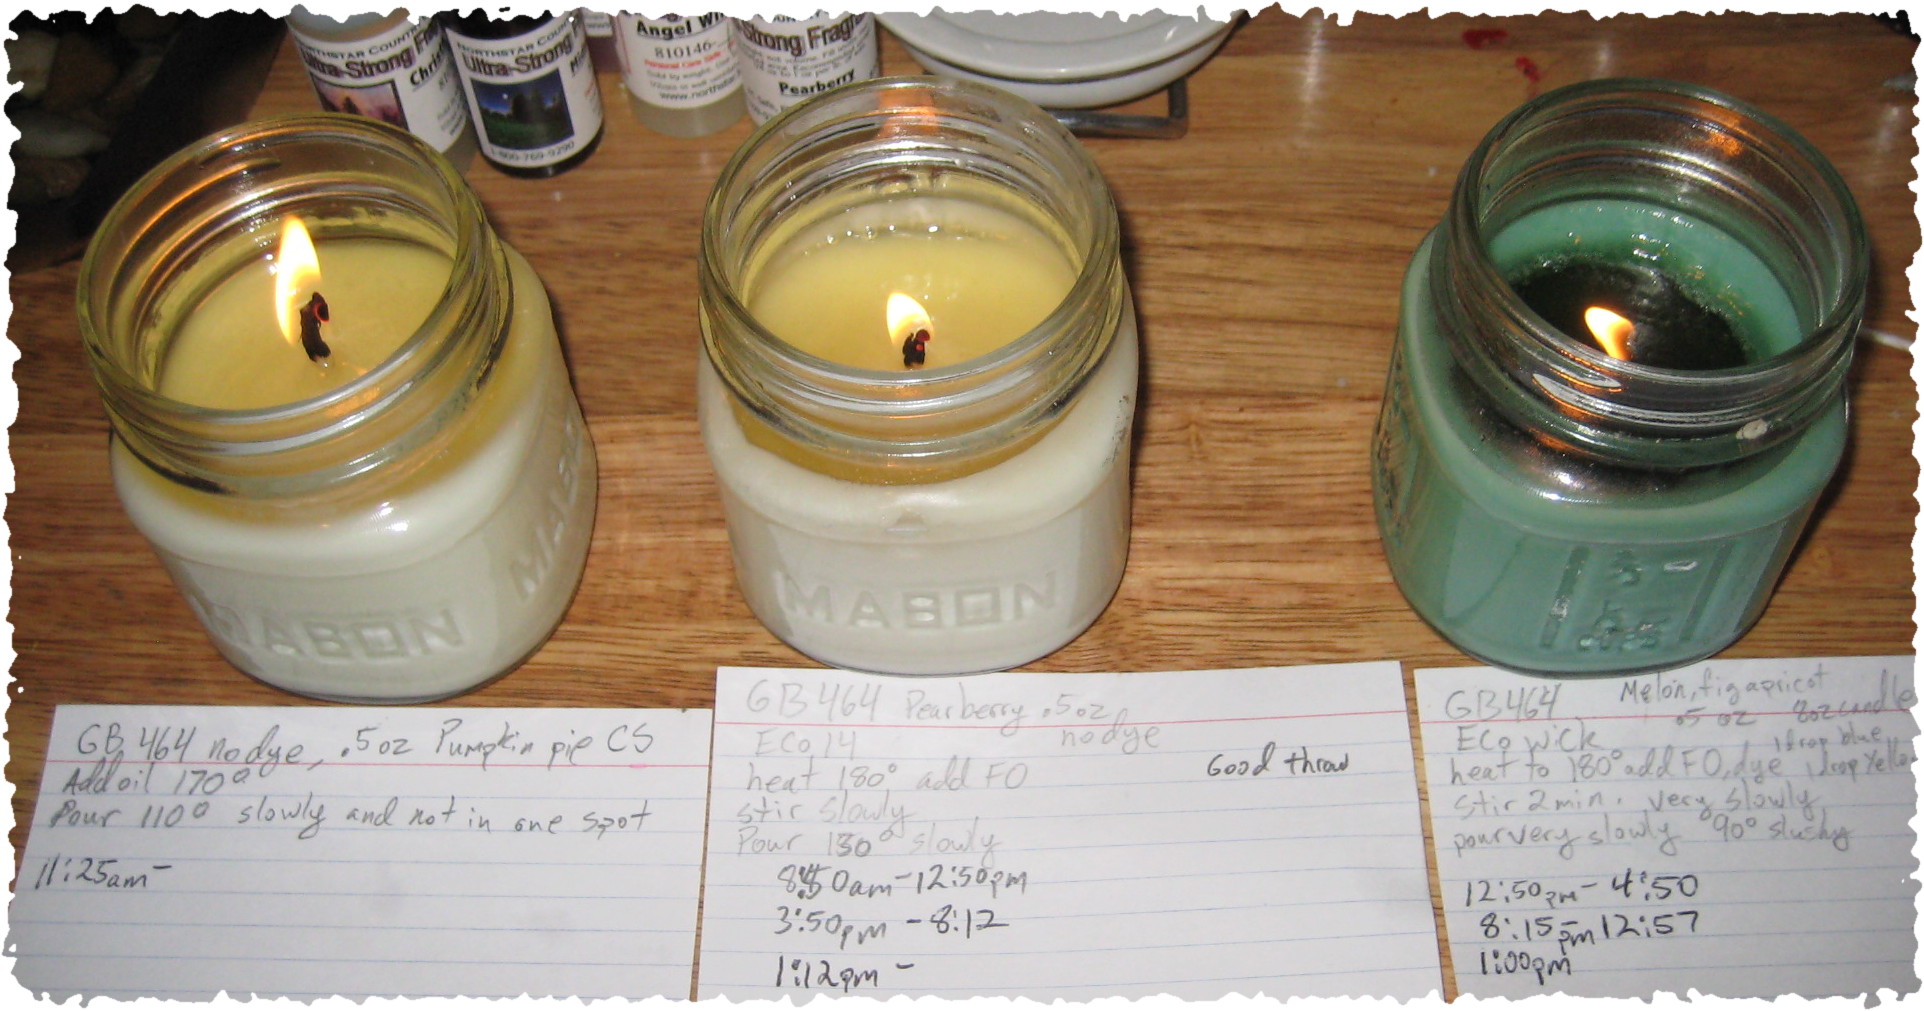 Review: Soy Wax GW 464-Golden Brands - Learn How To Make Soy Candles at Home